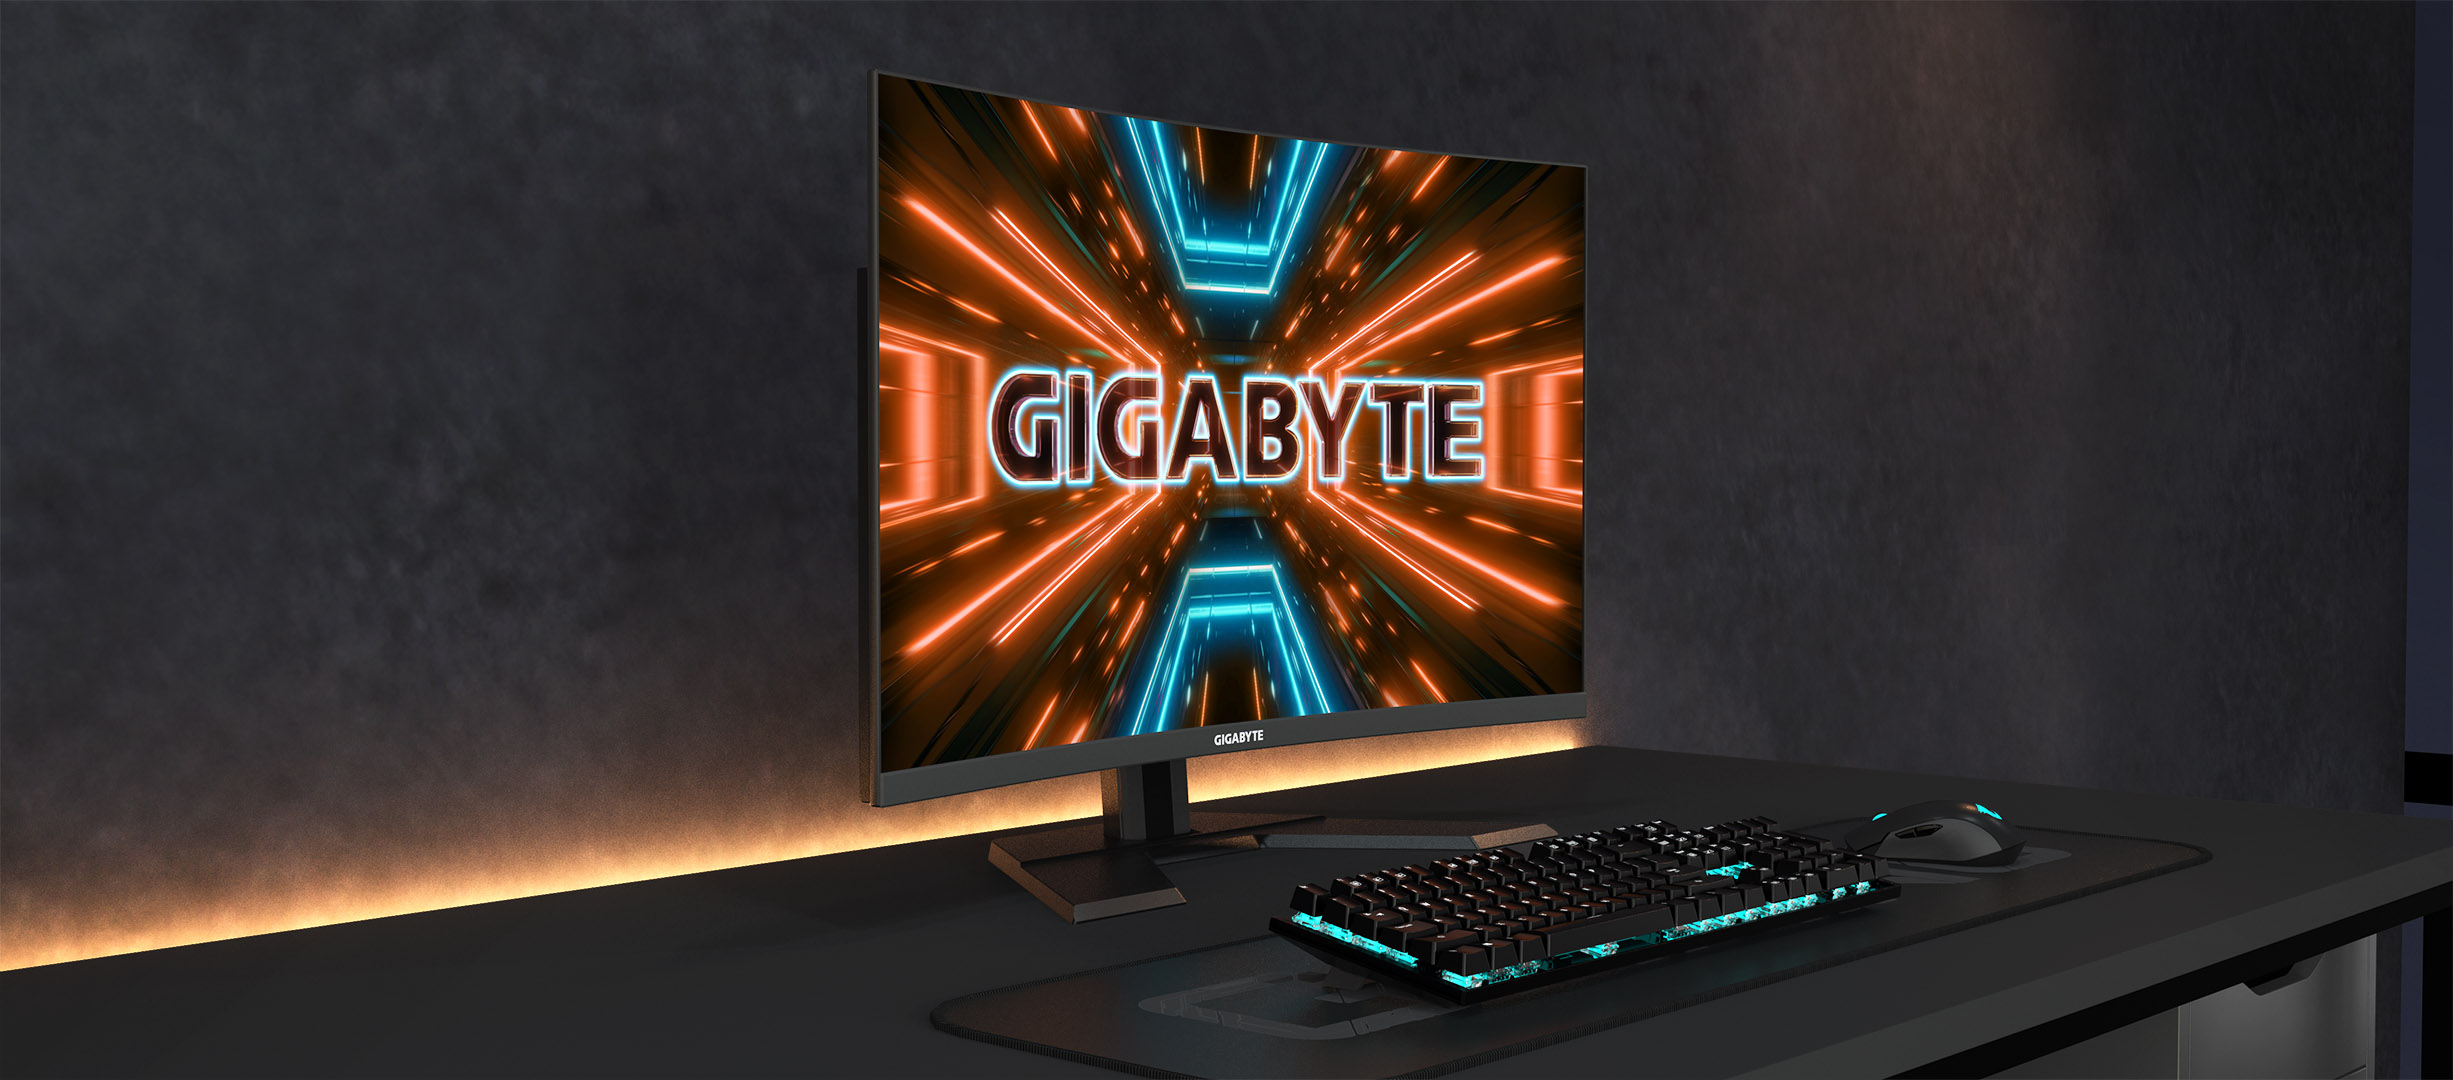 M32UC Gaming Monitor Key Features | Monitor - GIGABYTE Global